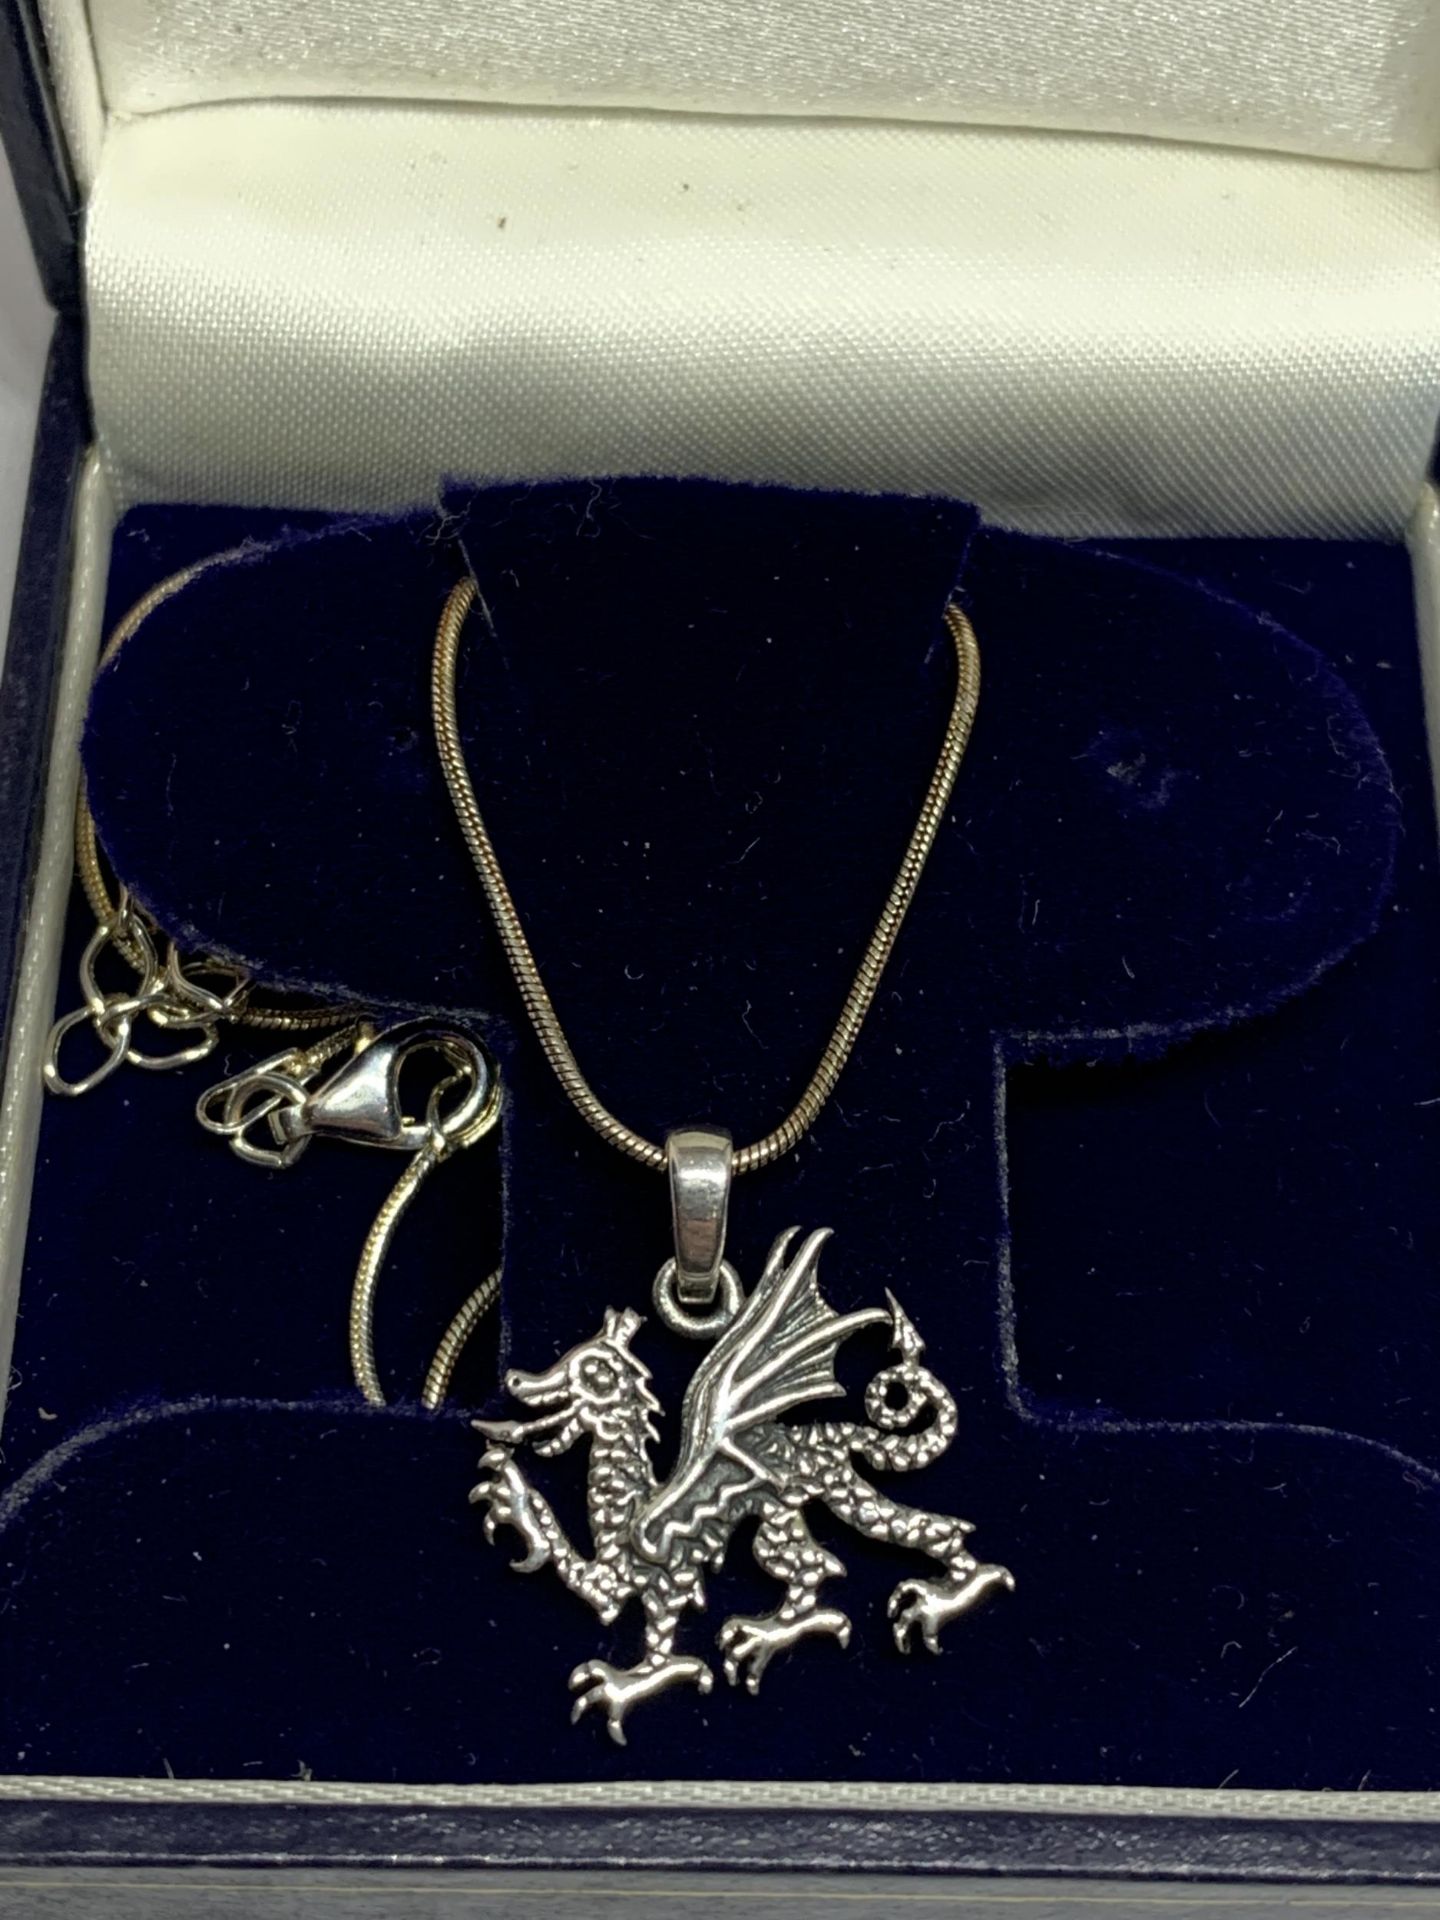 A WELSH DRAGON NECKLACE IN A PRESENTATION BOX